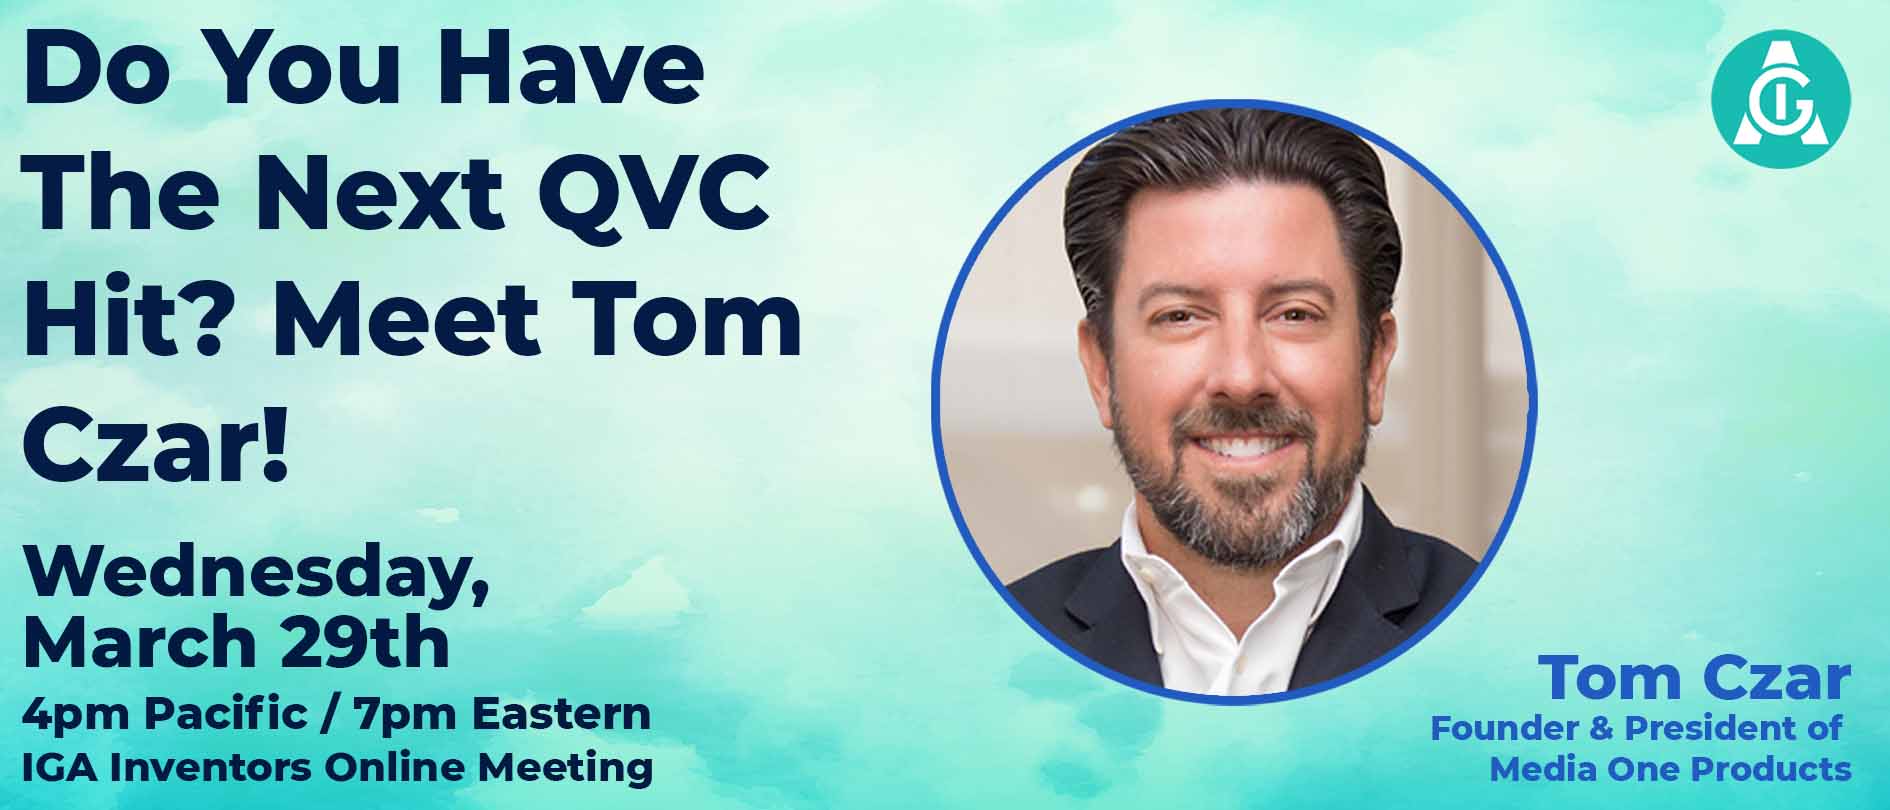 <h3><strong>Tom Czar President of MediaOne is looking for ideas!</strong></h3>